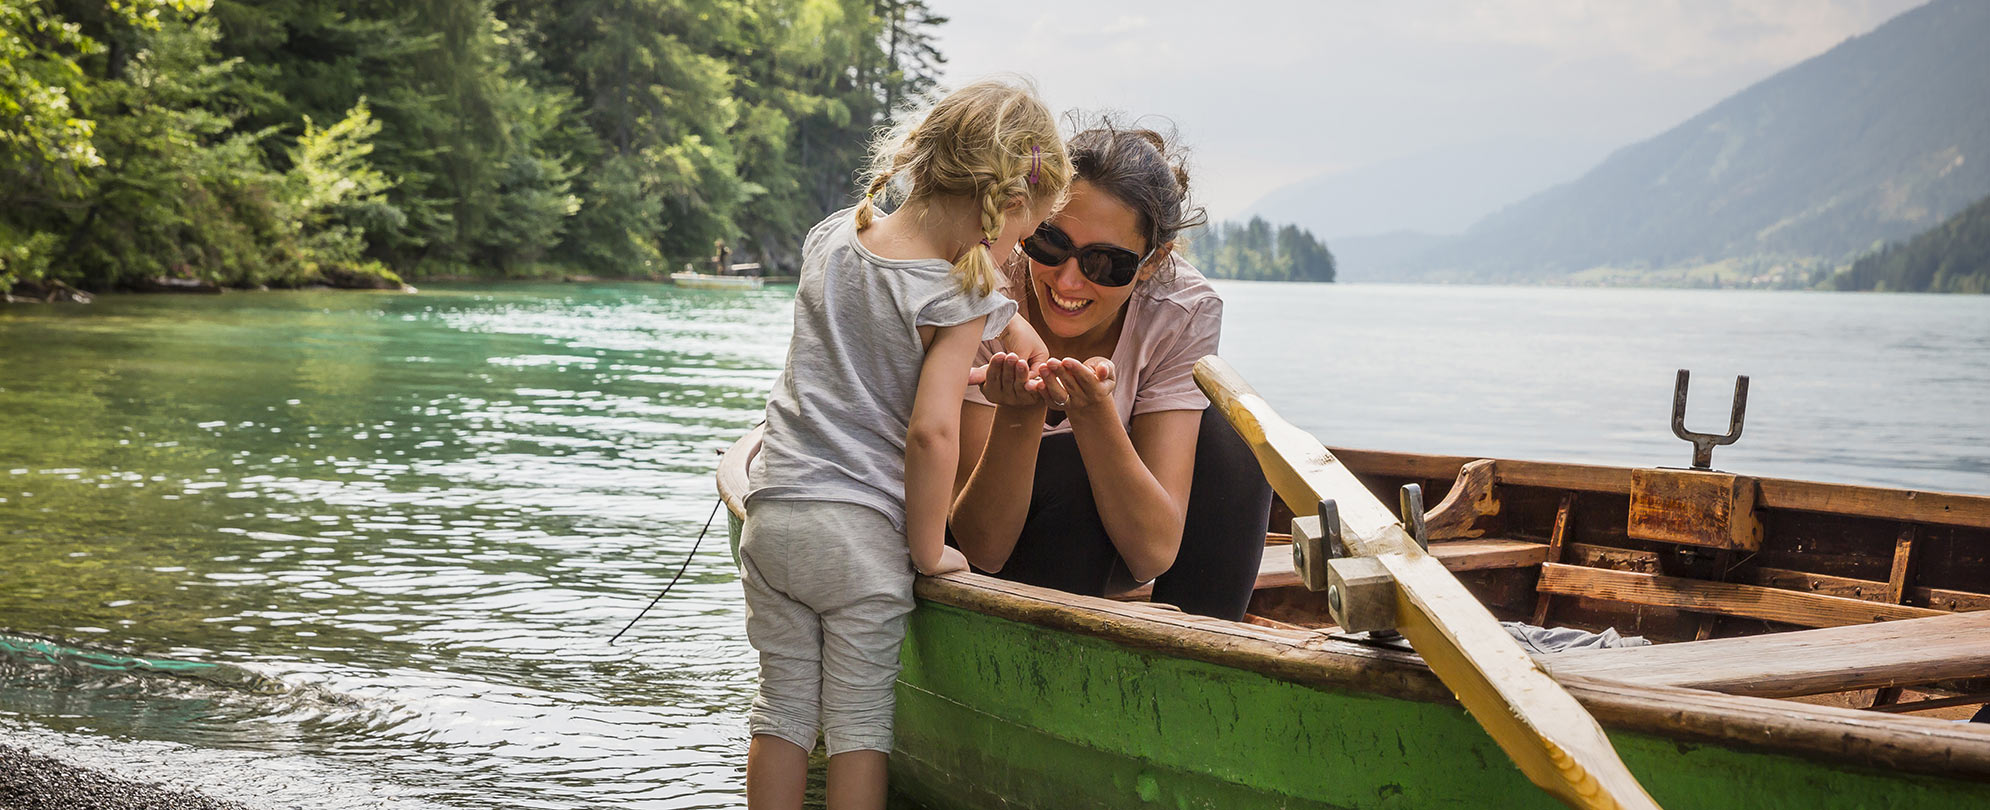 A woman sits in a row boat while docked in the shallow end of a lake holds her hands out for a little girl facing her to grab something from them.